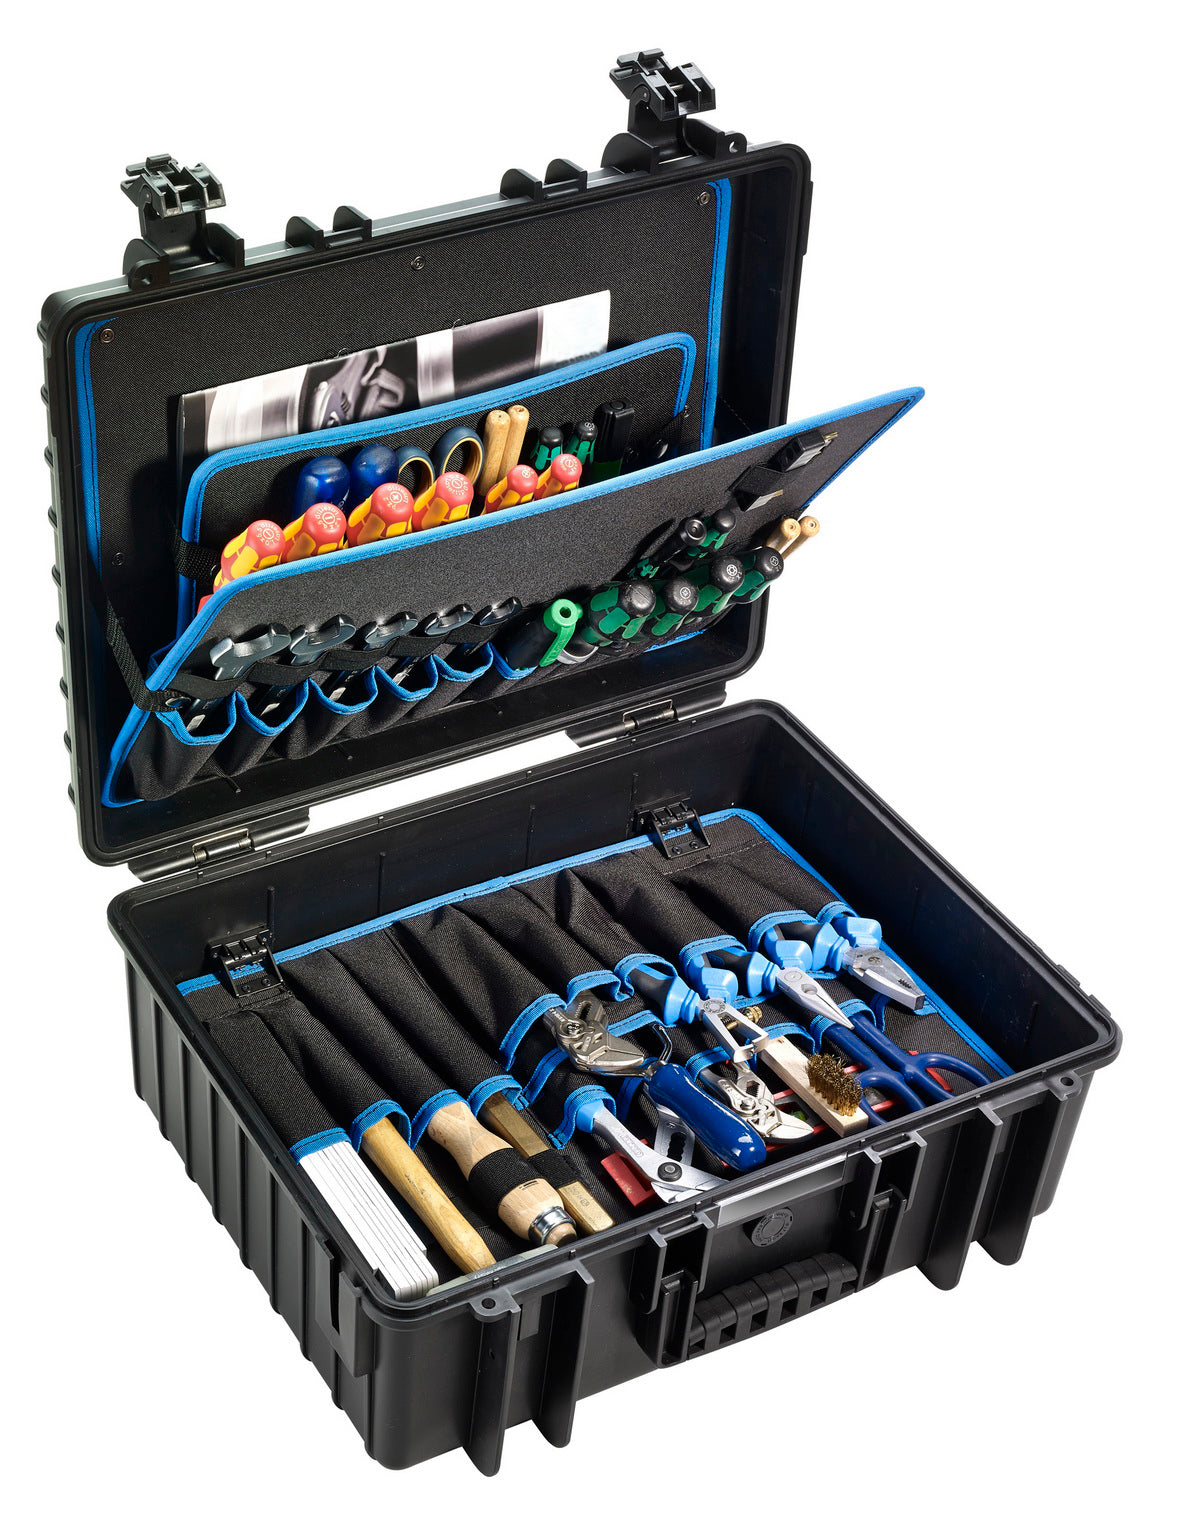 CasePro Genesis Waterproof Tool Case with Removable Pallets